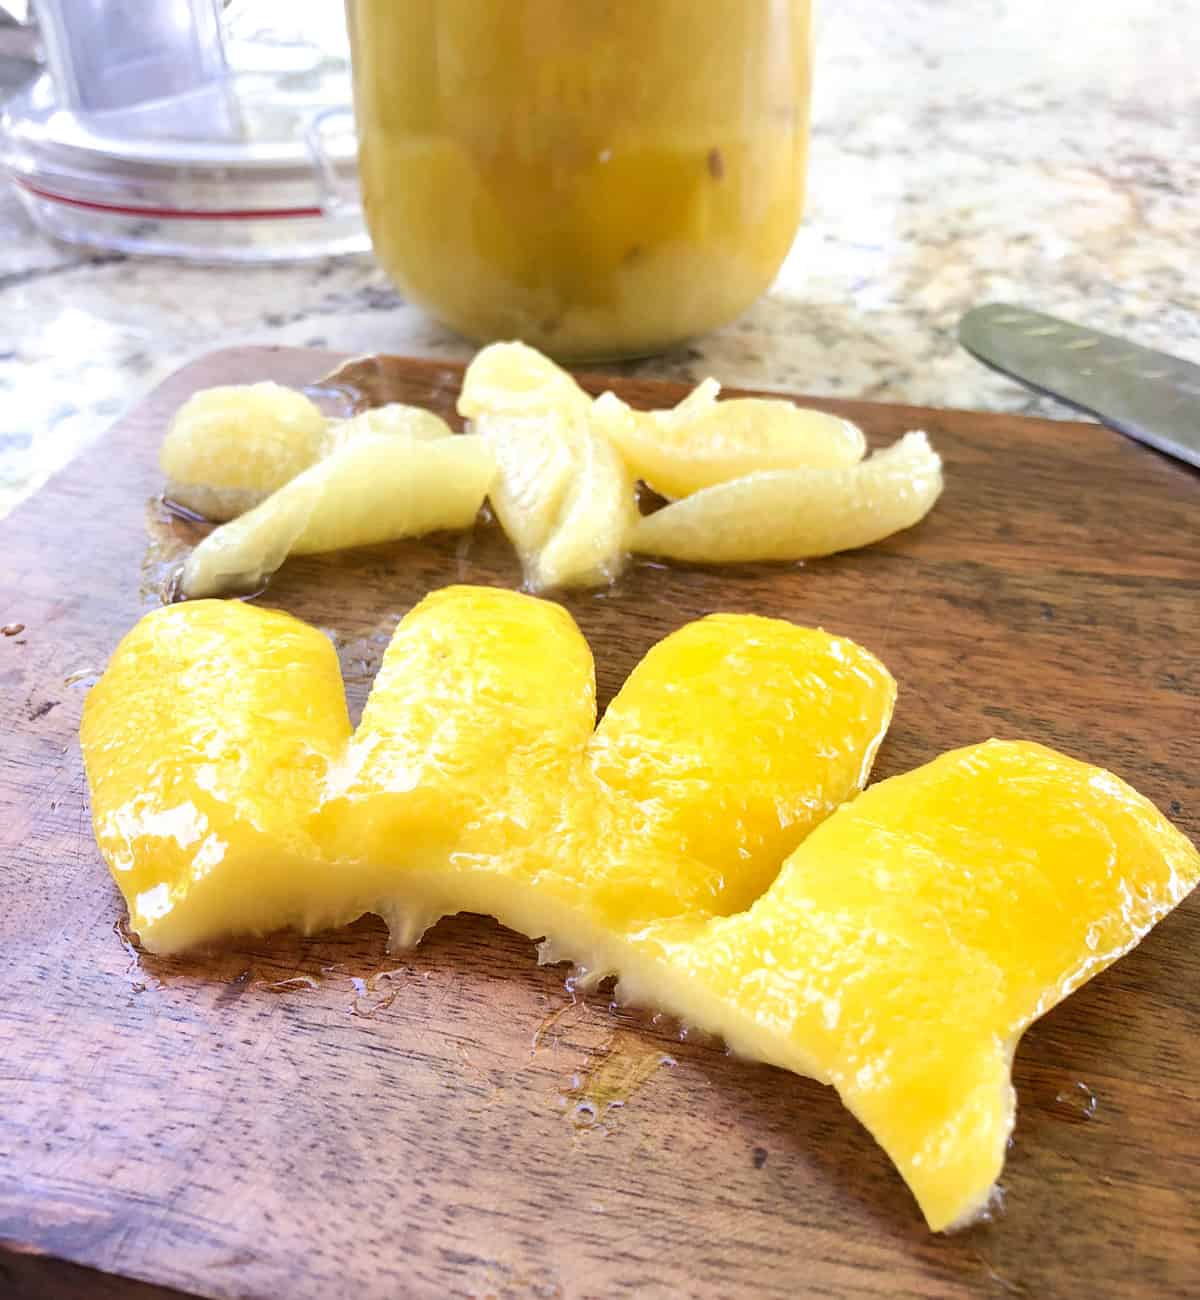 Separate the lemon pulp from the rind 